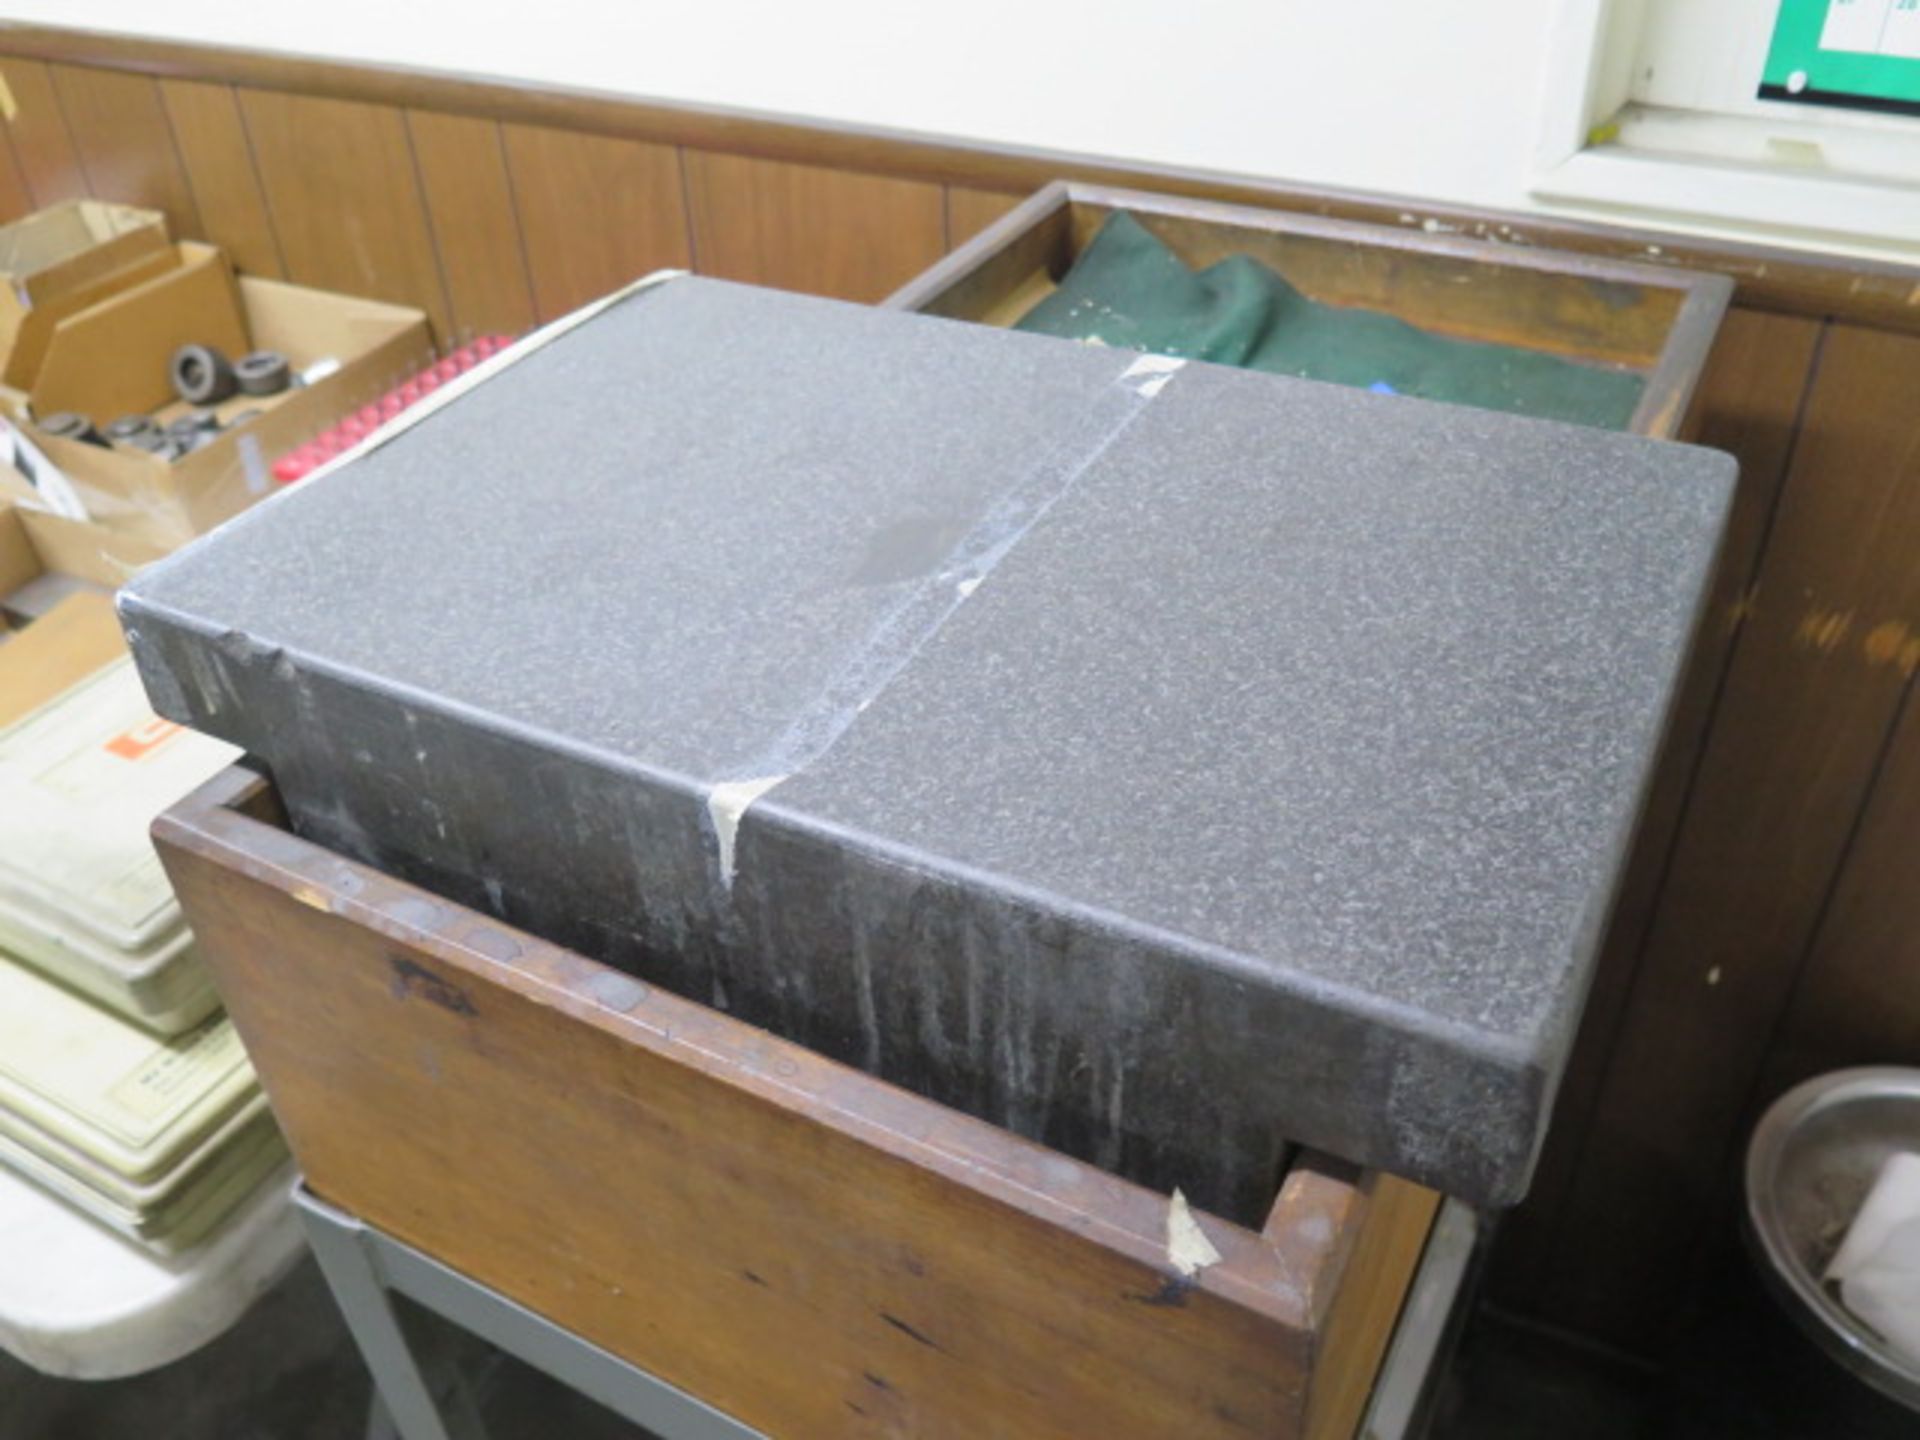 12" x 18" x 4" 2-Ledge Granite Surface Plate w/ Cart (SOLD AS-IS - NO WARRANTY) - Image 2 of 4